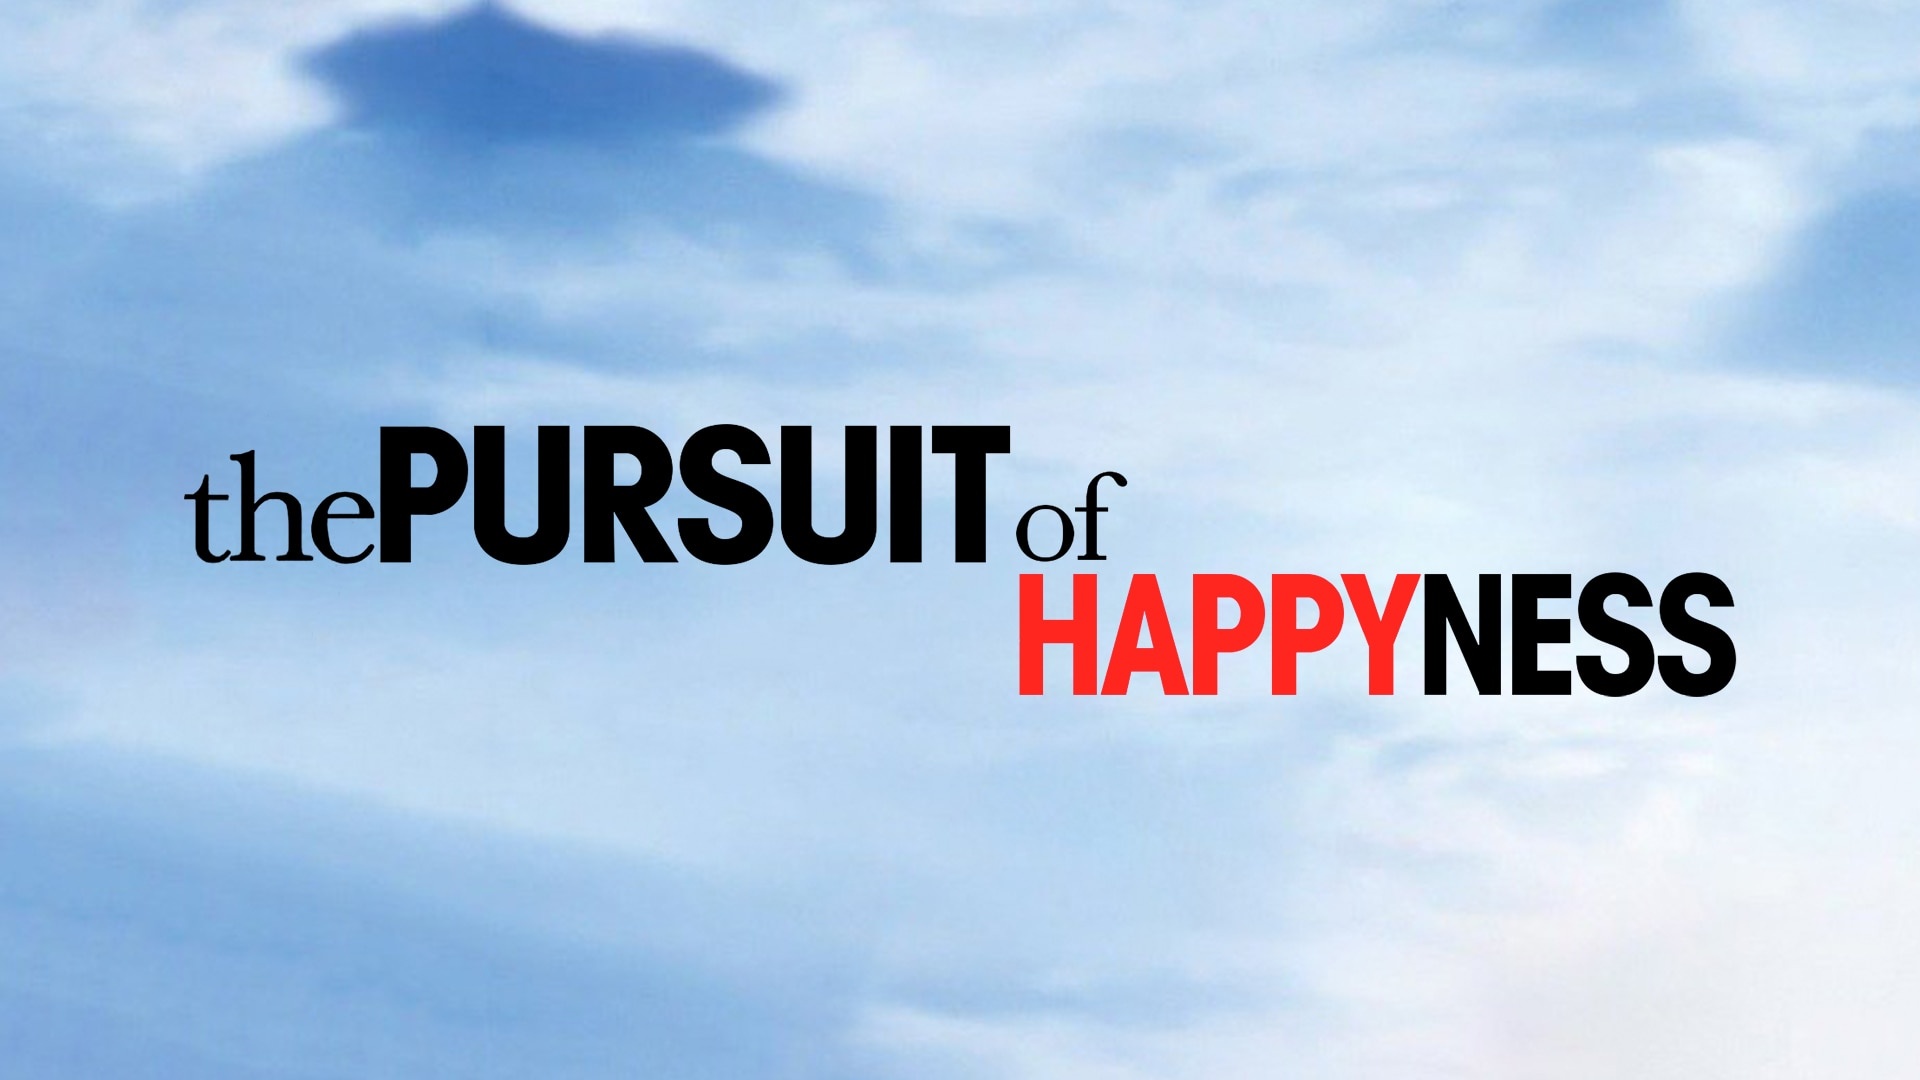 The Pursuit of Happyness: The film grossed $307.1 million against $55 million budget. 1920x1080 Full HD Wallpaper.